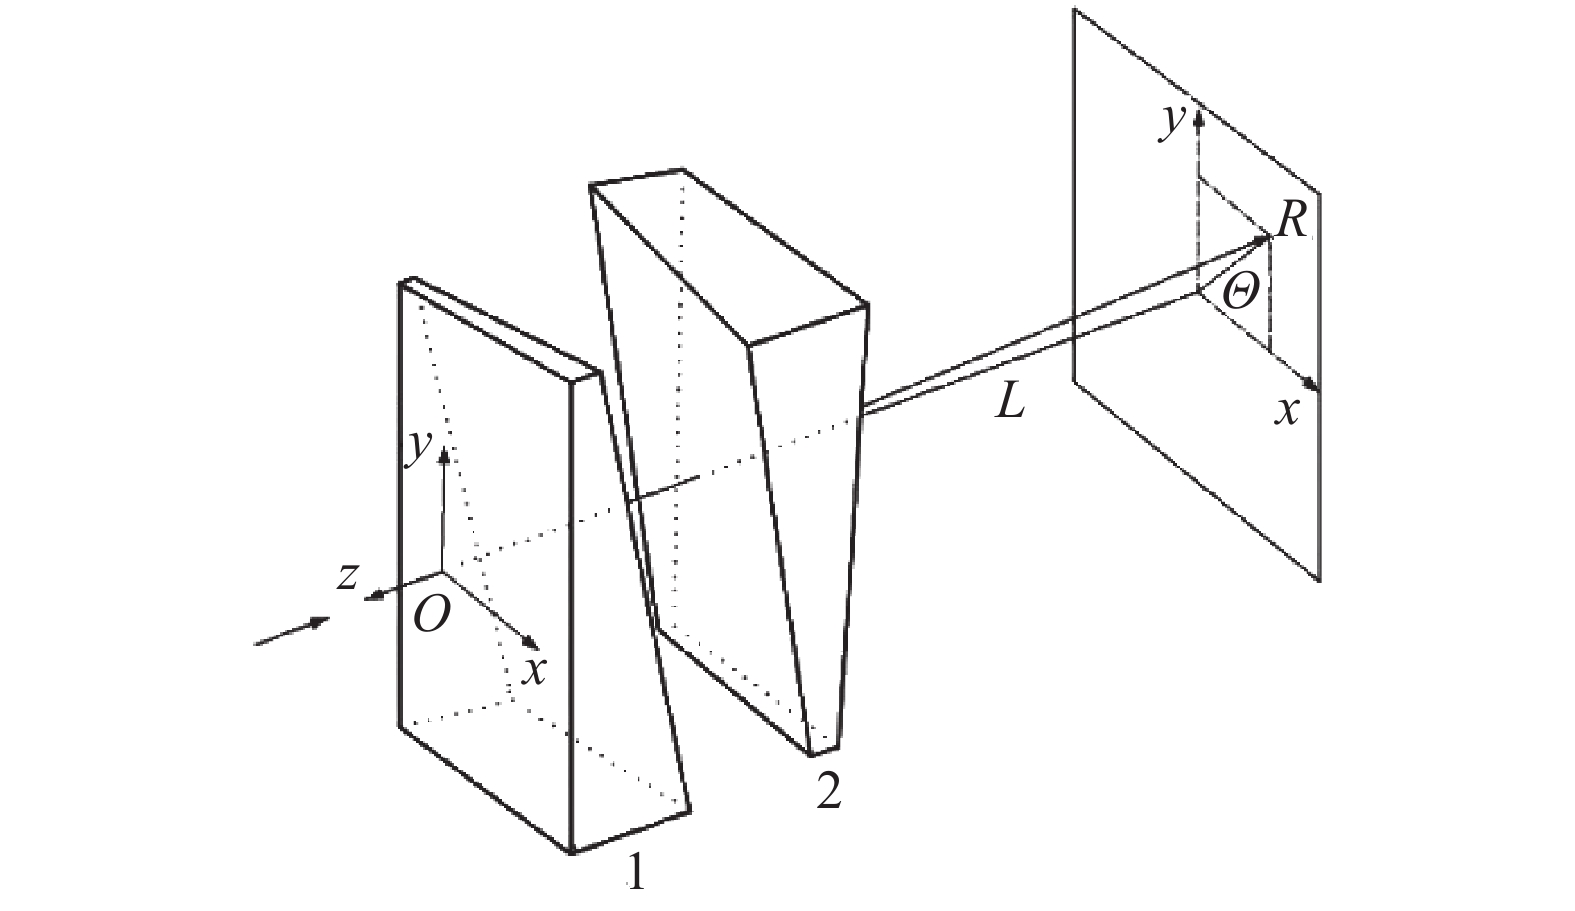 Schematic diagram of Risley prisms scanning